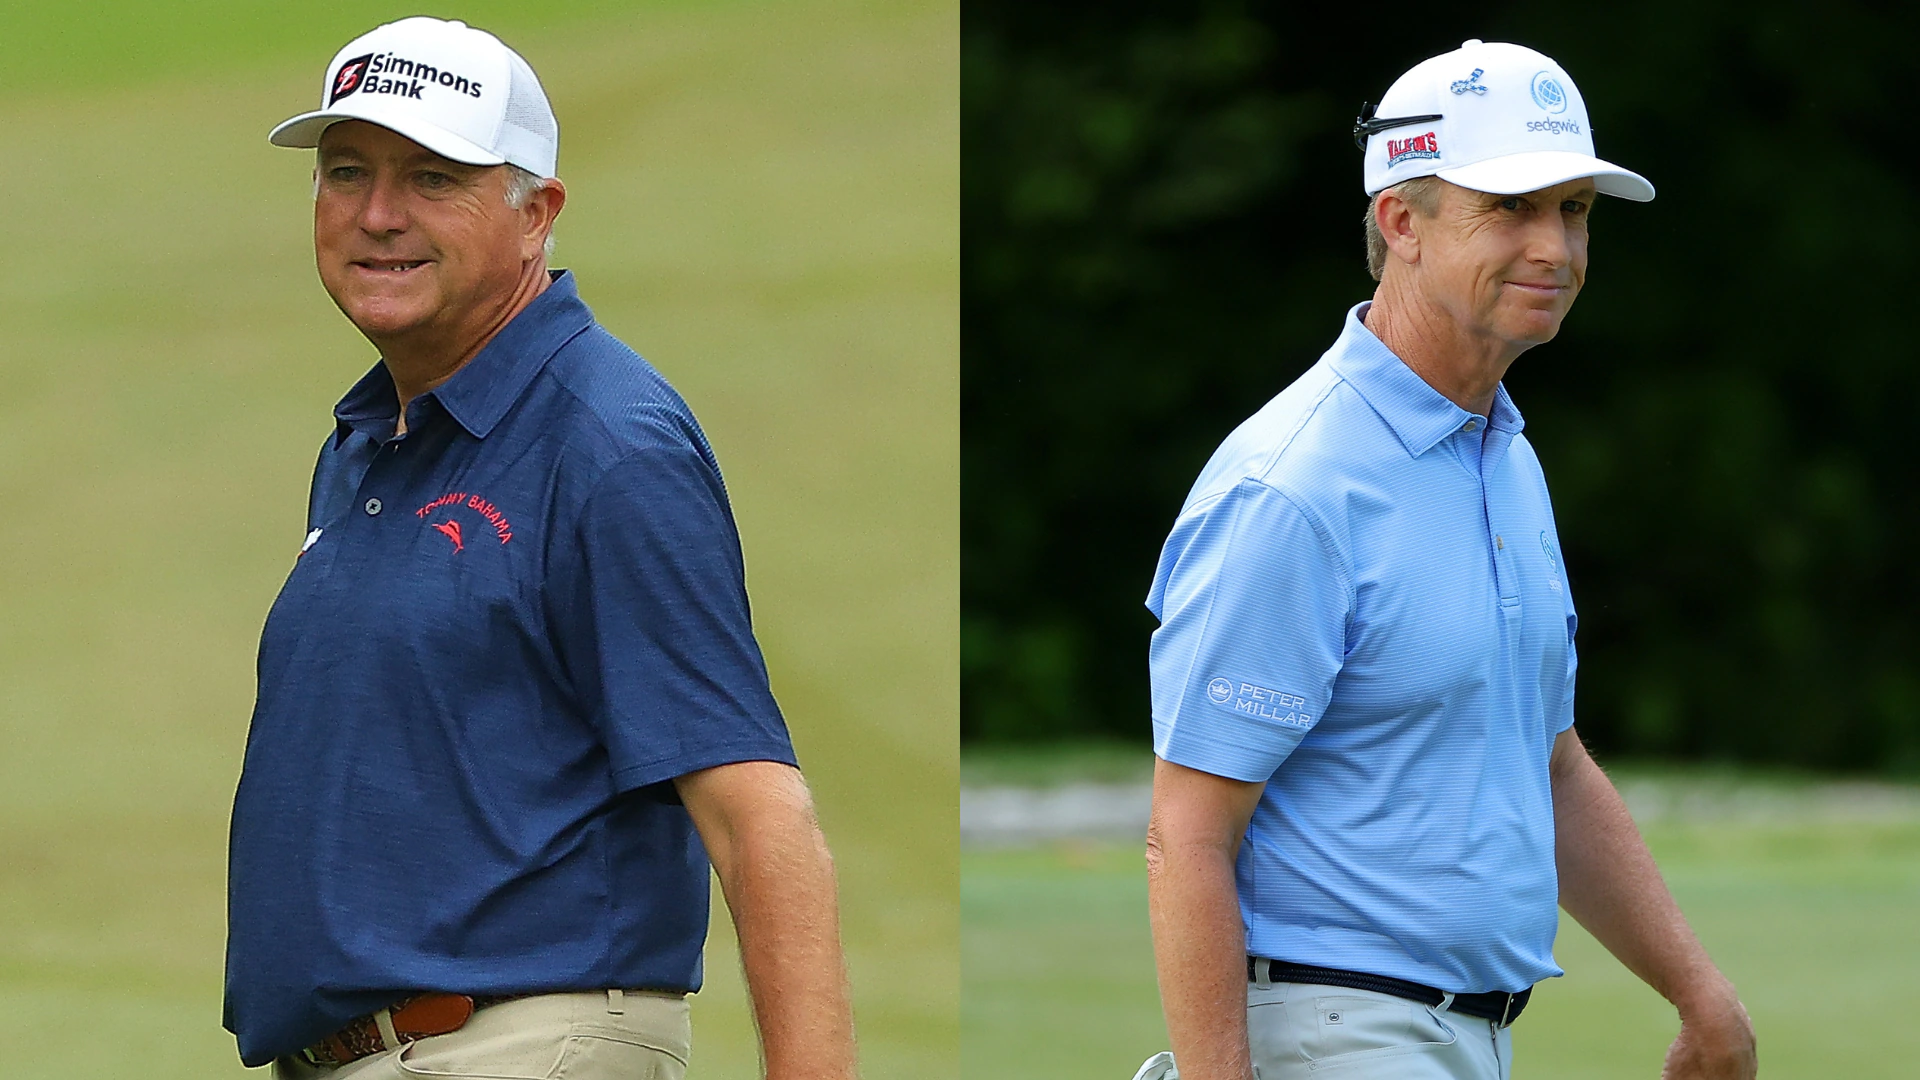 David Toms, Ken Duke lead after opening round of Mitsubishi Electric Classic